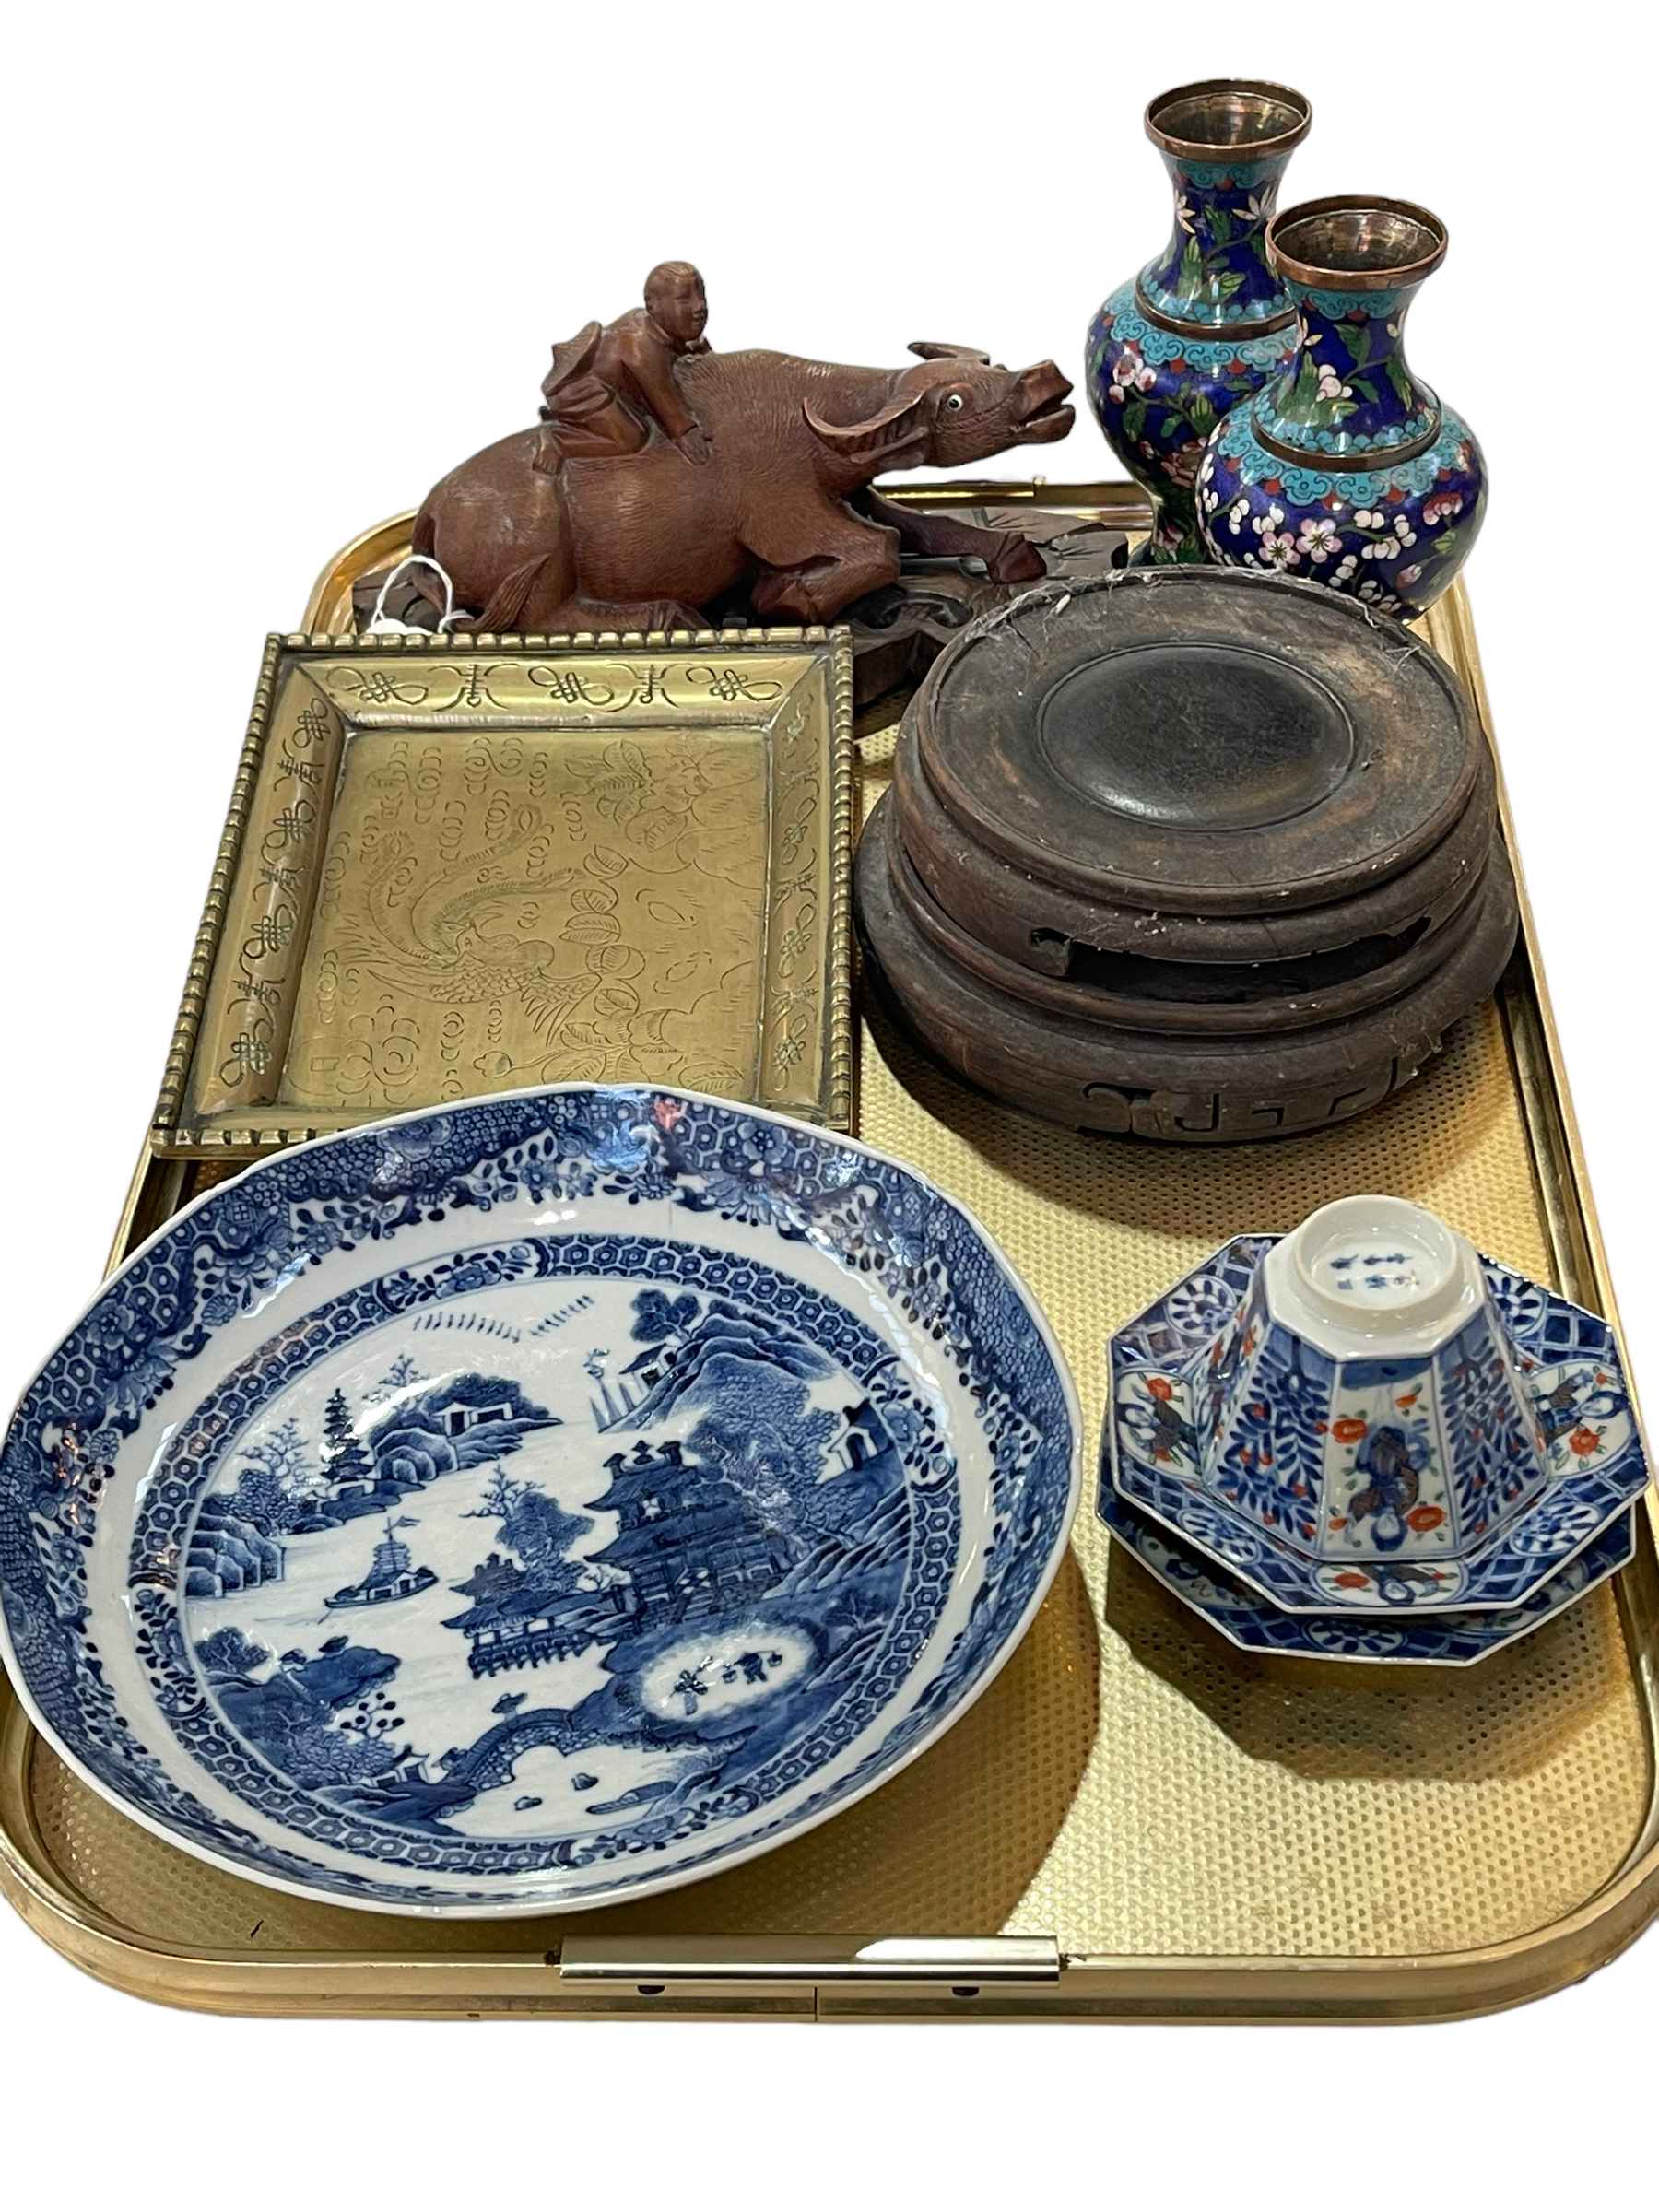 Pair of Cloisonné vases, carved buffalo on stand, blue and white Chinese plate, tea bowl and saucer,